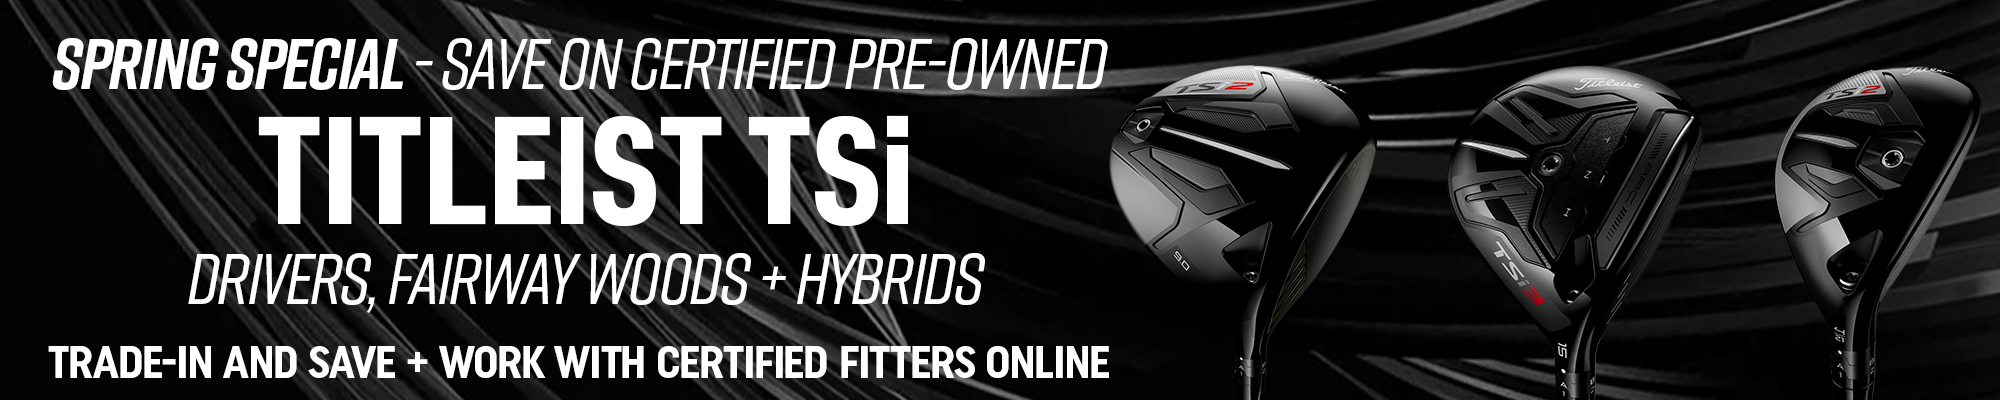 Spring Special - Save on Certified Pre-Owned Titleist TSi Drivers, Fairway Woods + Hybrids | Trade-In and Save - Work with certified fitters online